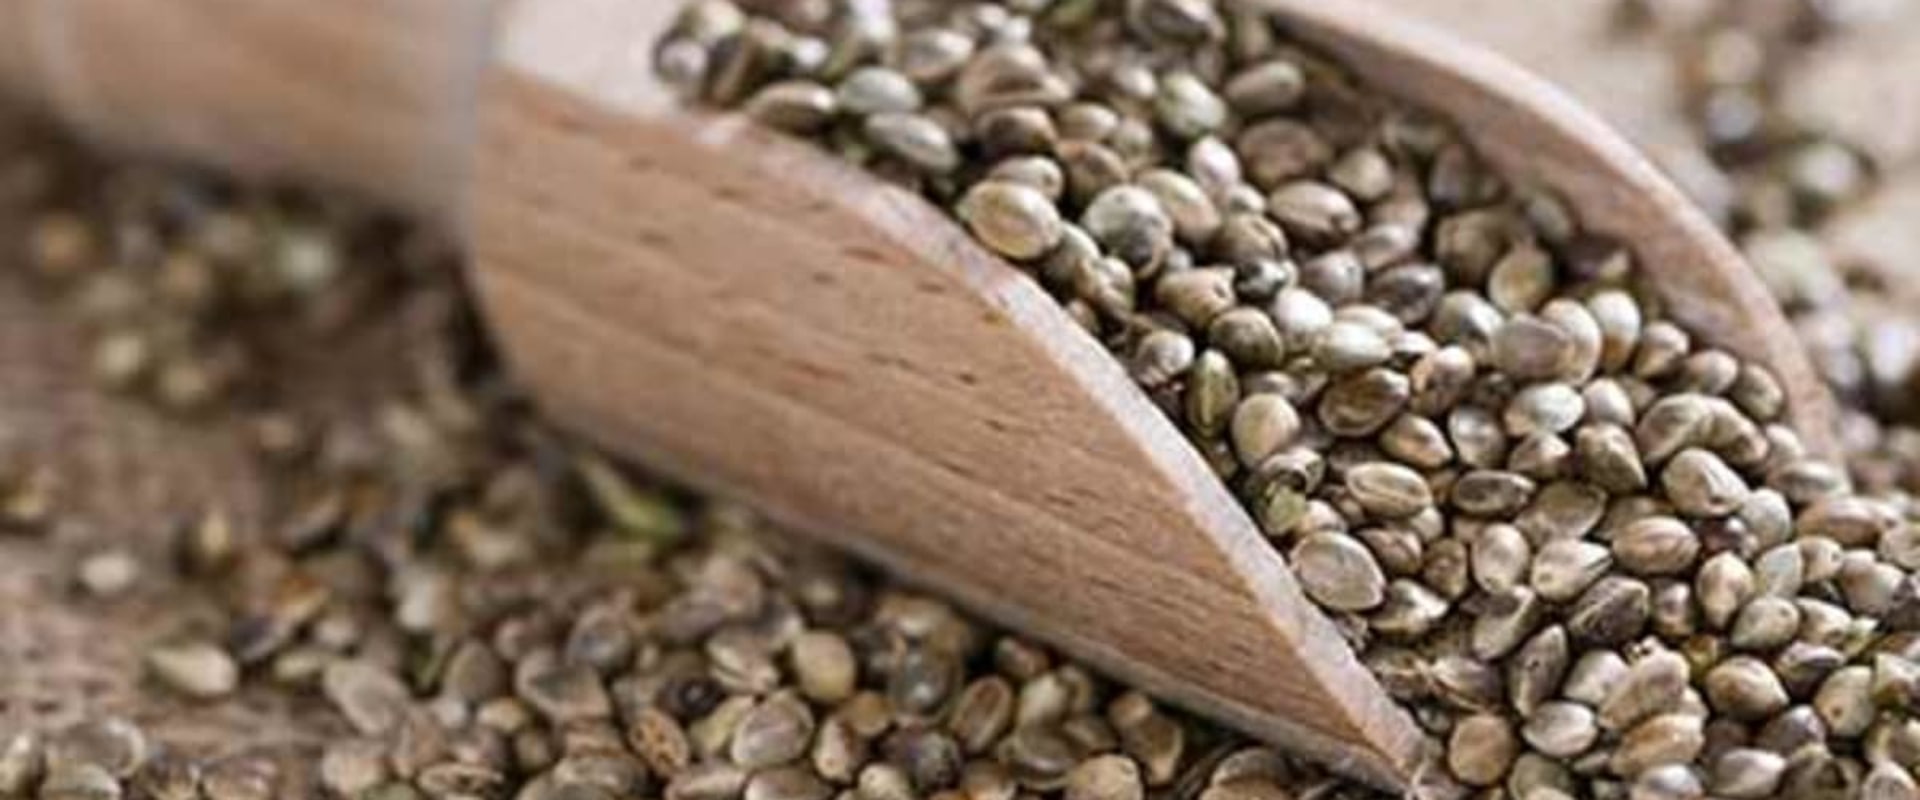 Relieving Constipation with Hemp Seeds